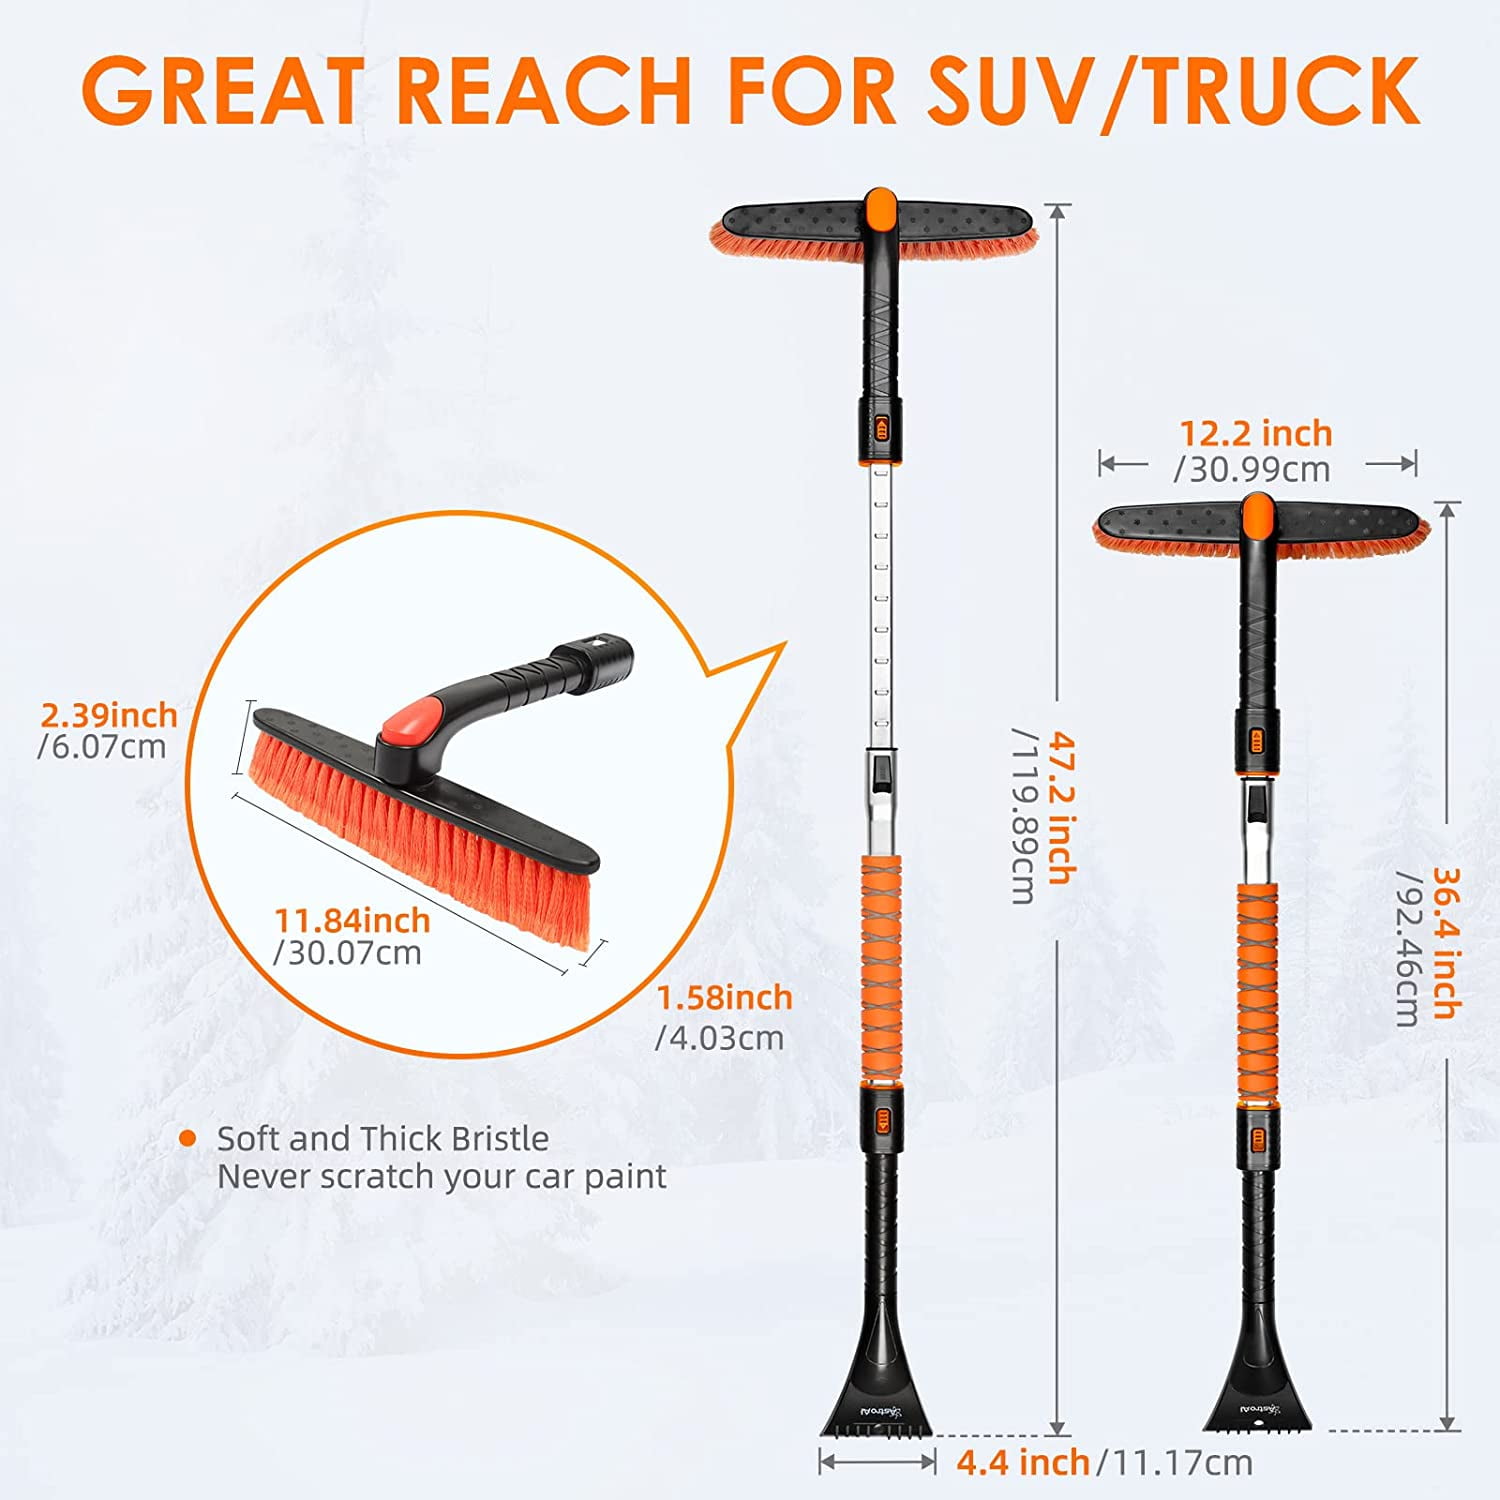  VaygWay Ice Scraper and Extendable Snow Brush for Car  Windshield- Adjustable Length Foam Grip 360° Pivoting Brush Head for Snow,  2 in 1 Sturdy Winter Ice and Snow Remover for Car